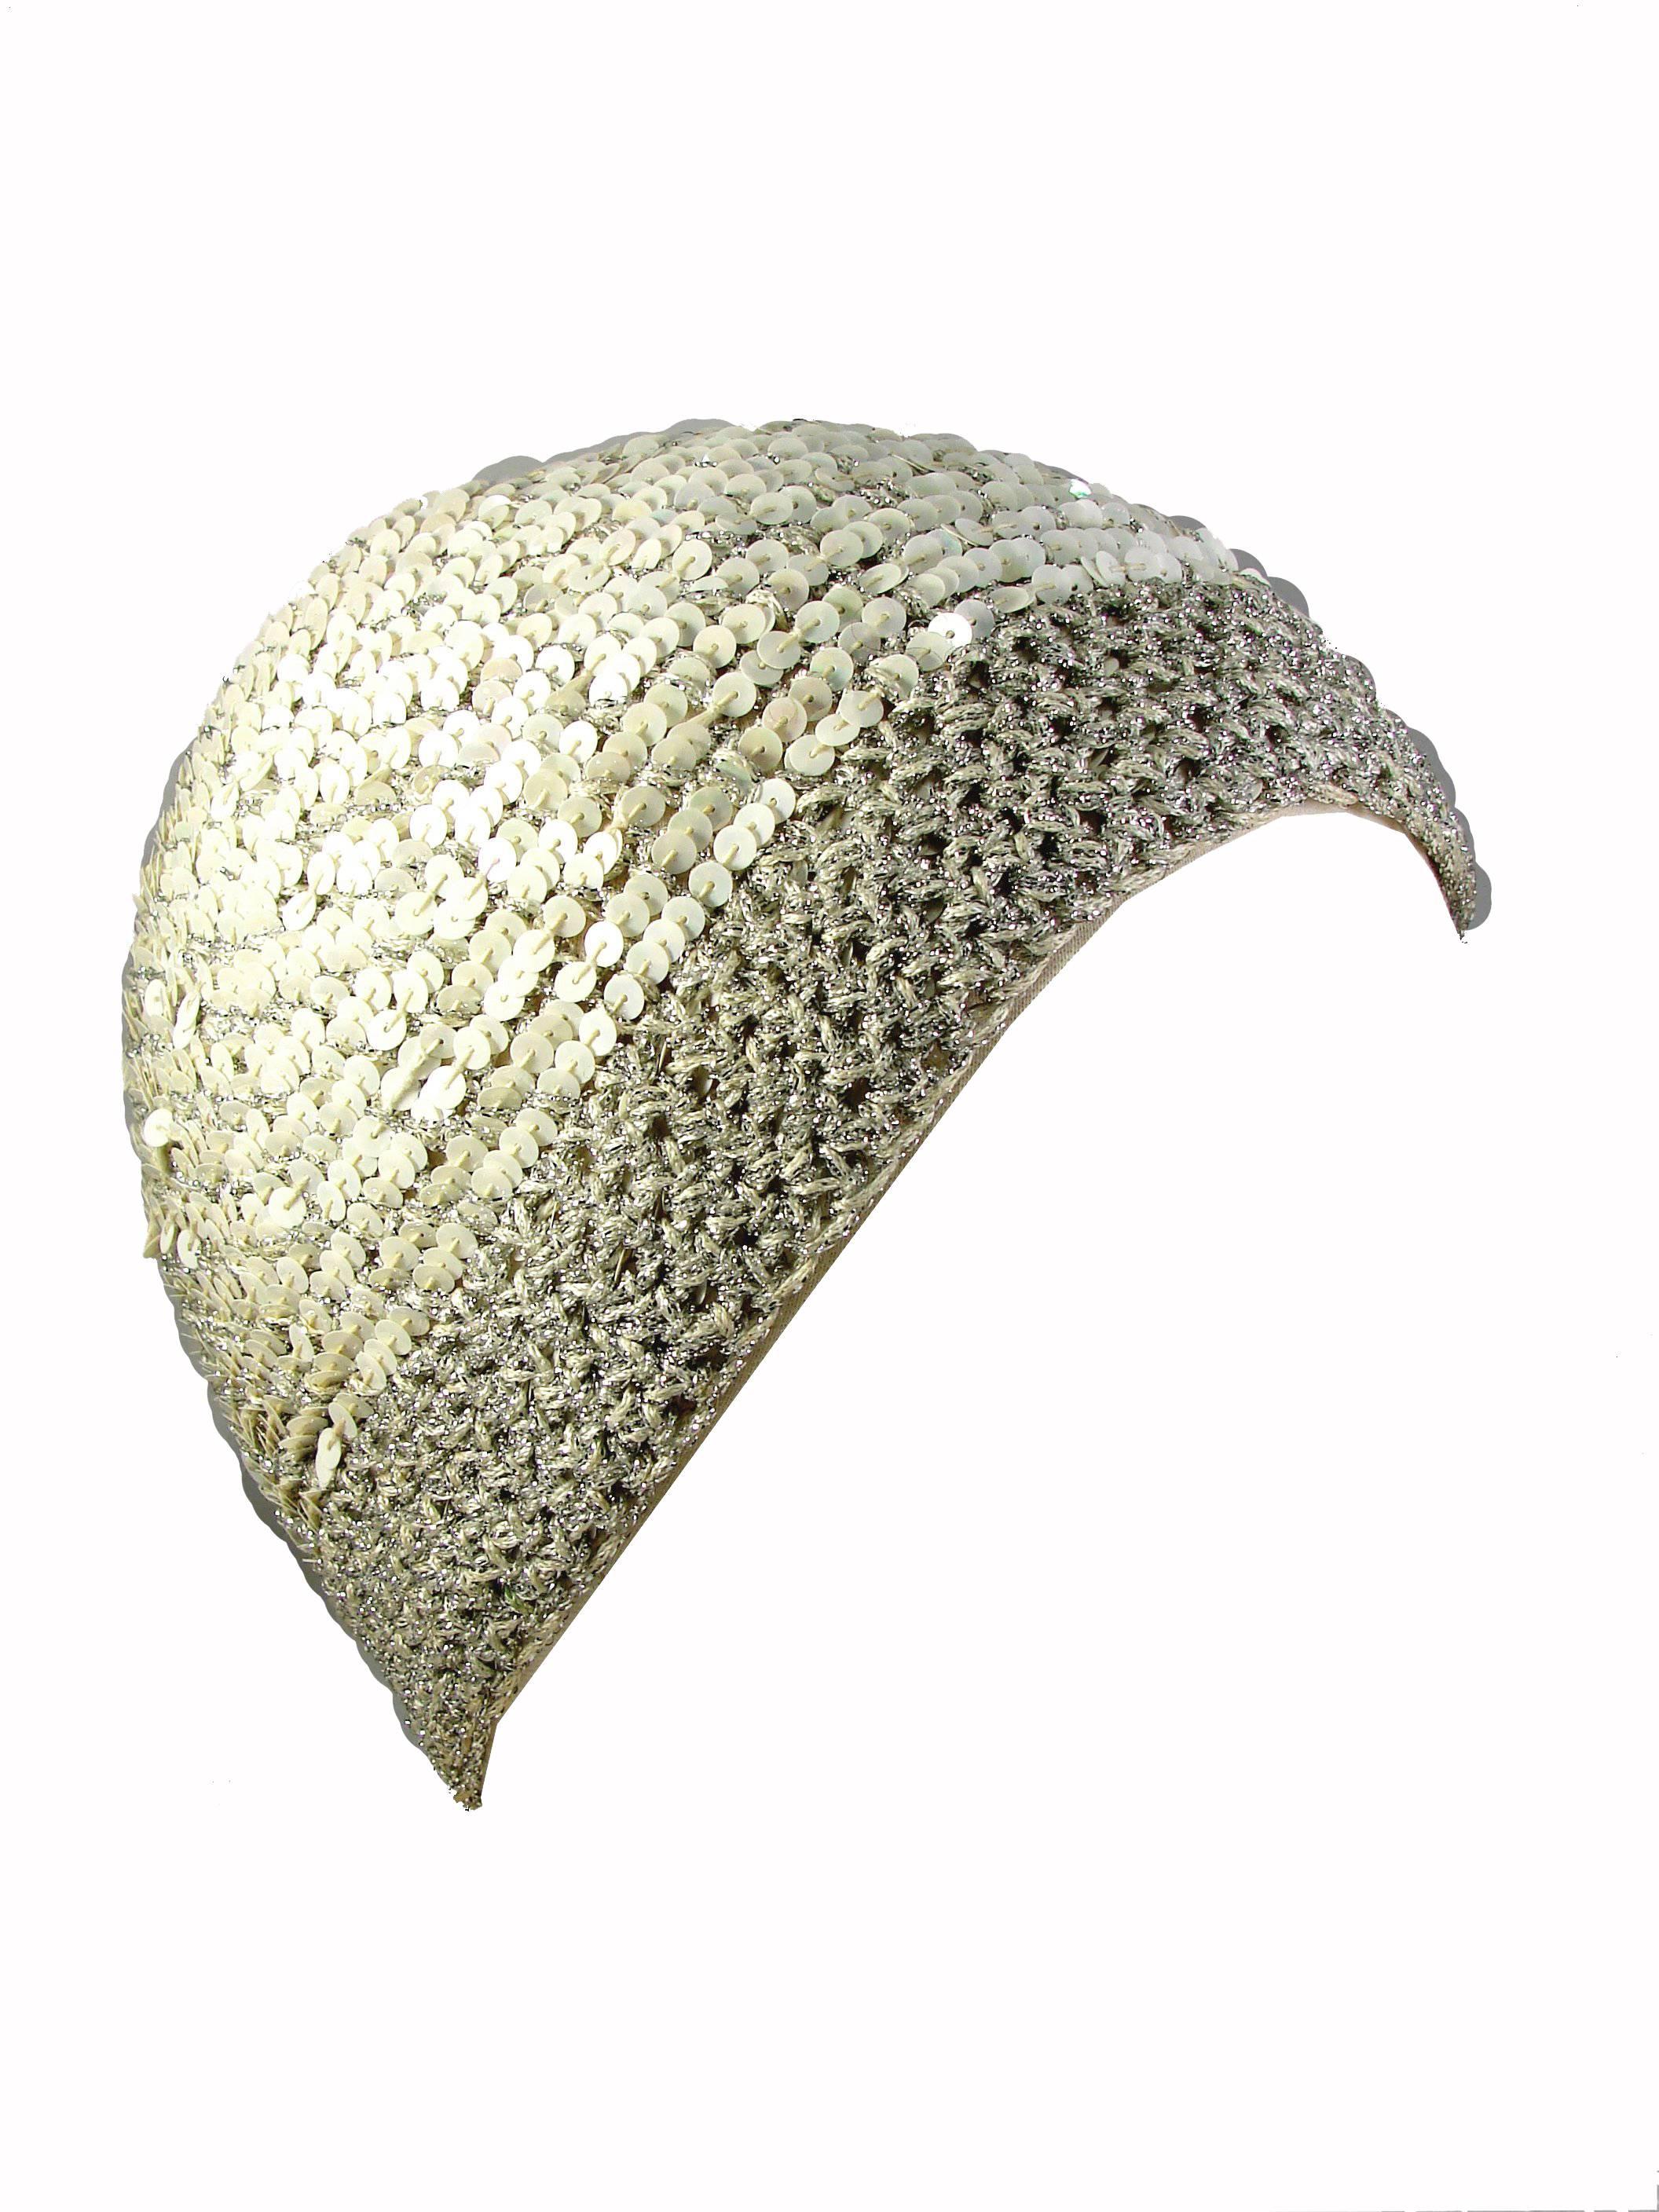 Here's an incredible sequins hat from Halston circa 1971.  Made from white sequins and a silver metallic thread knit, this skull cap features two elasticized laces, which enable one to adjust the bottom band and change its shape.  Very cool! Tagged